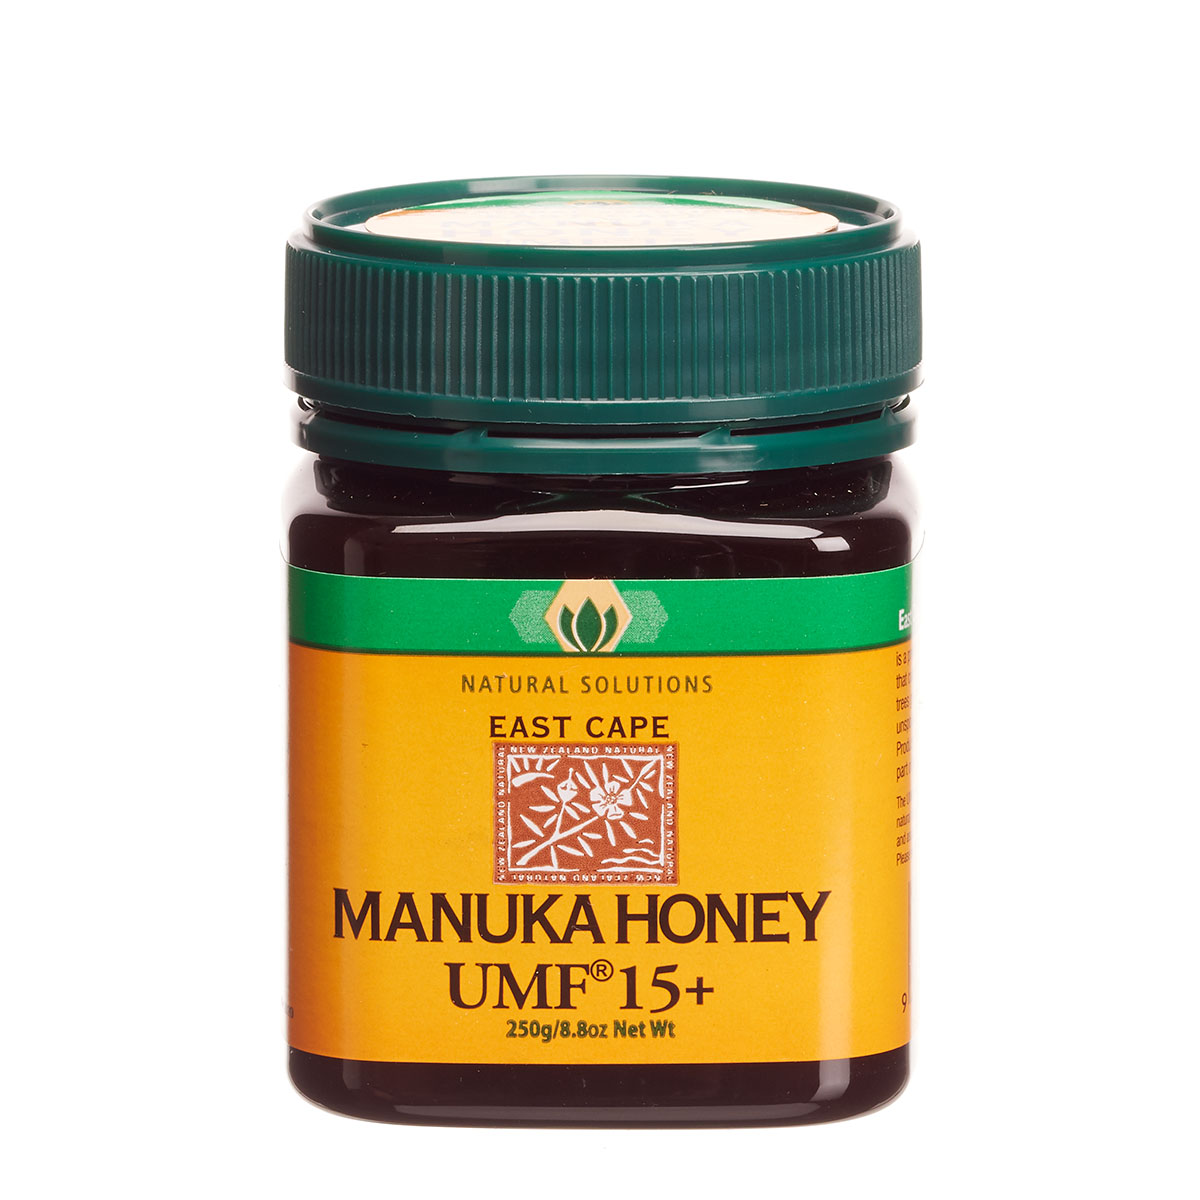 6 Manuka Honey Benefits to keep your Family Healthy this Winter